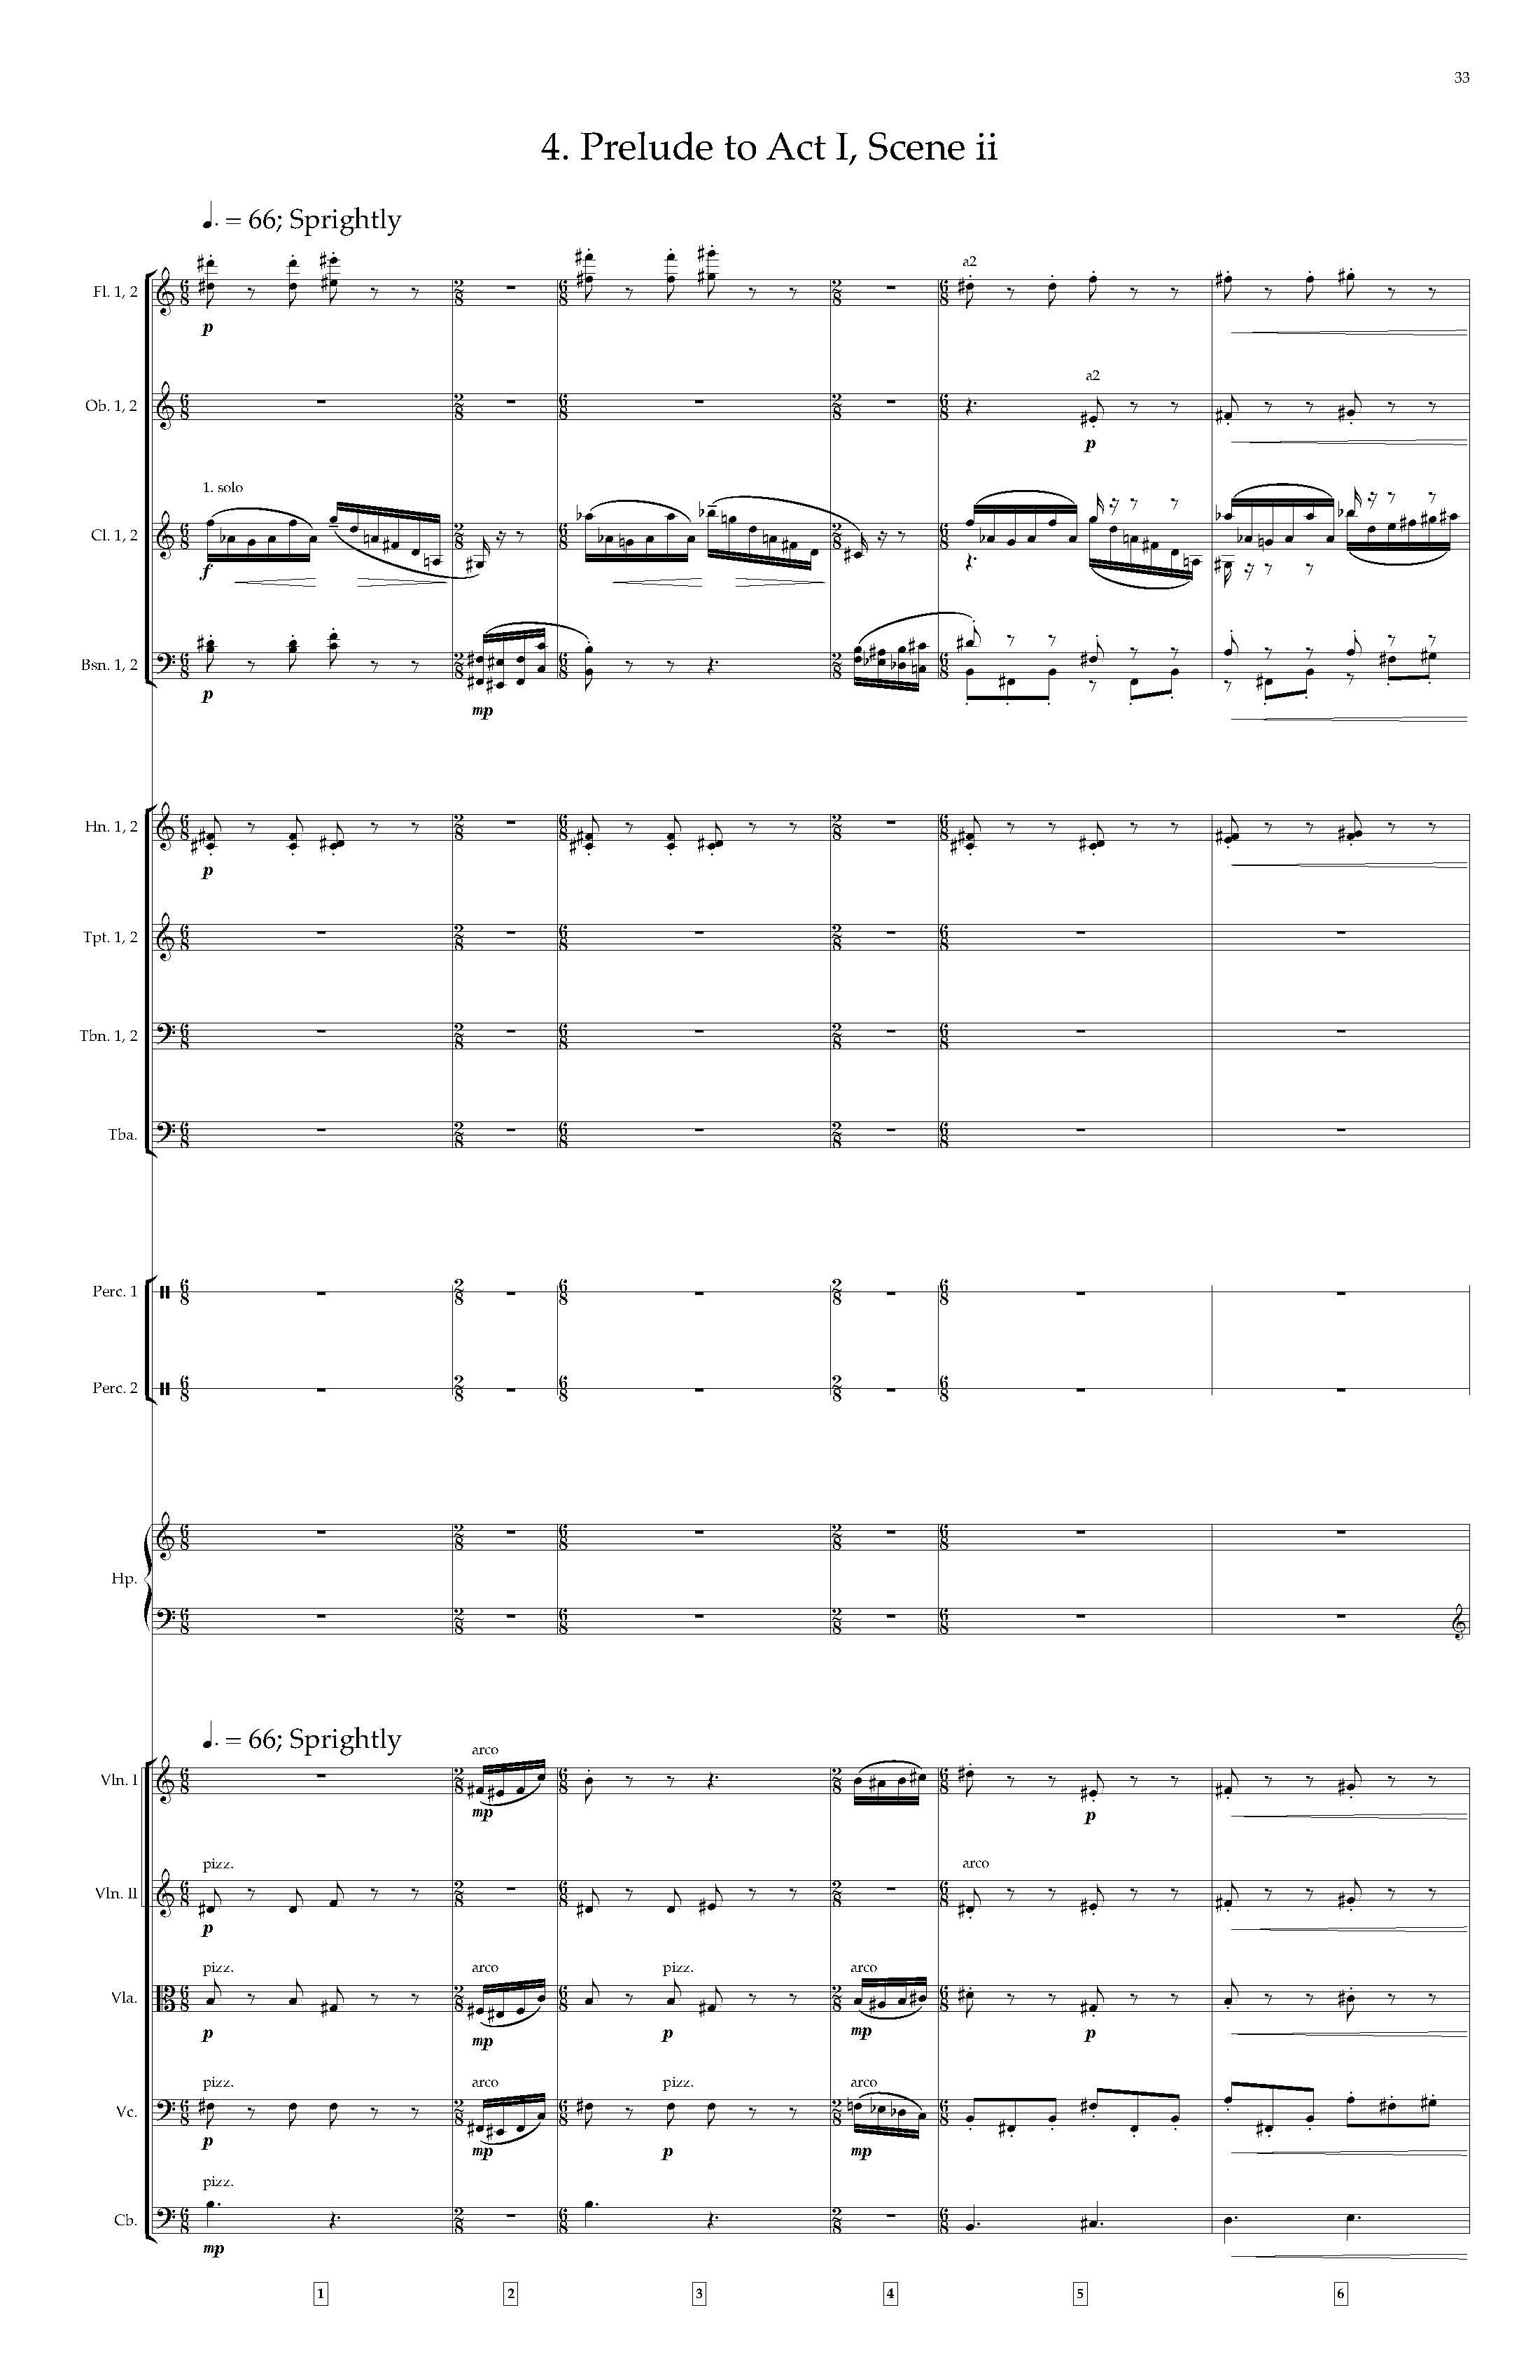 Arias and Interludes from HWGS - Complete Score_Page_39.jpg